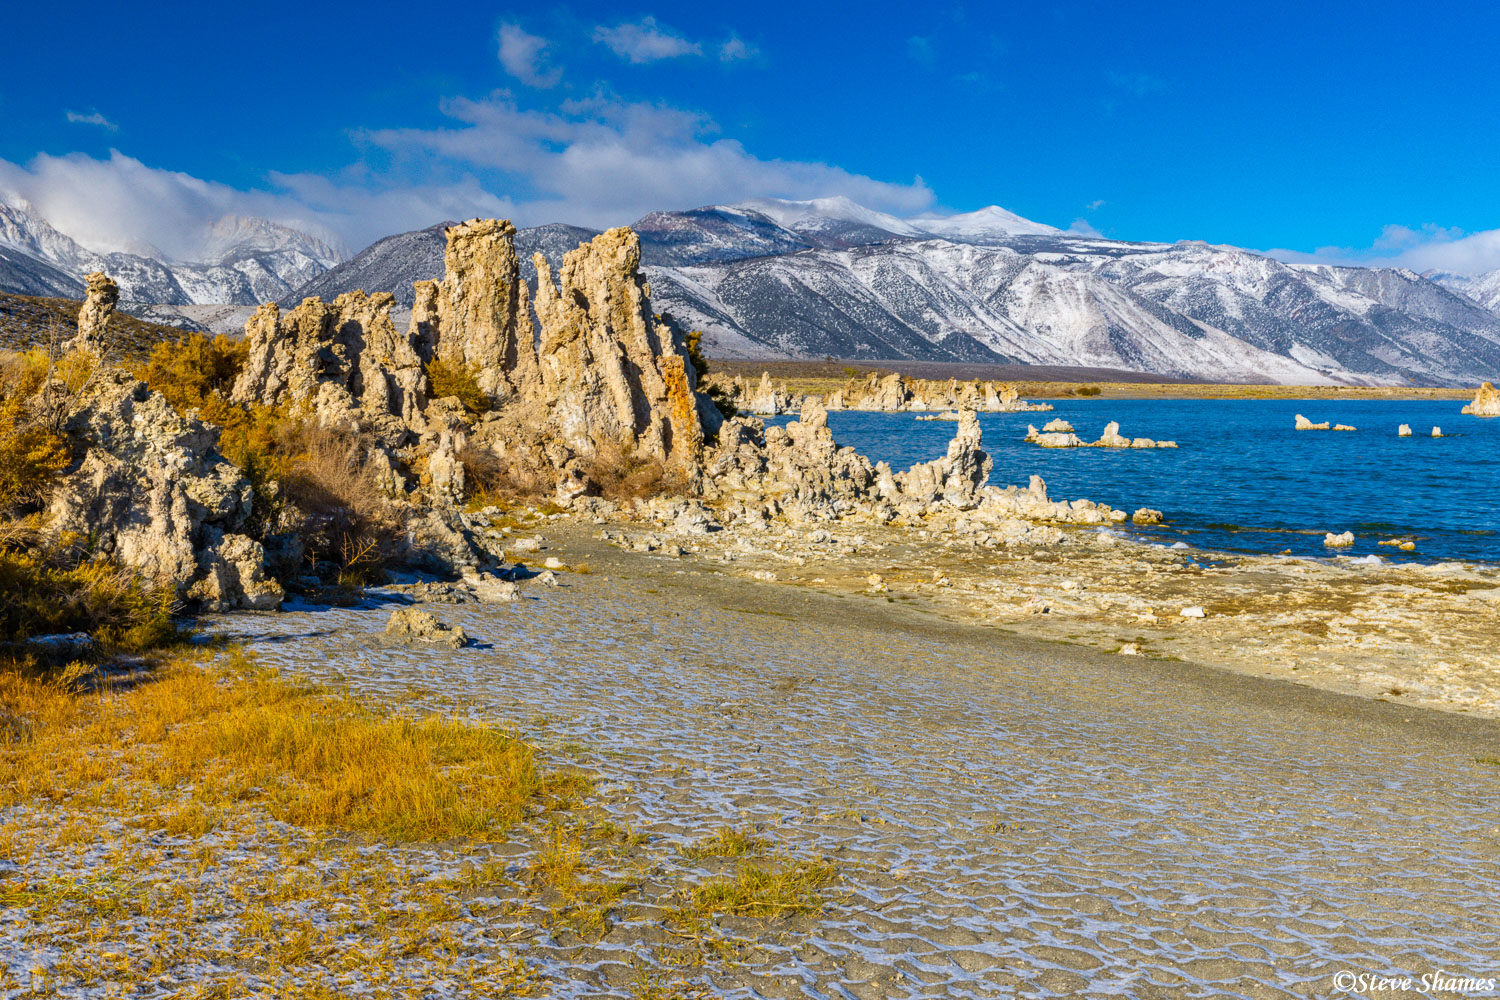 Morning scene at Mono Lake, with a little dusting of snow on the ground.